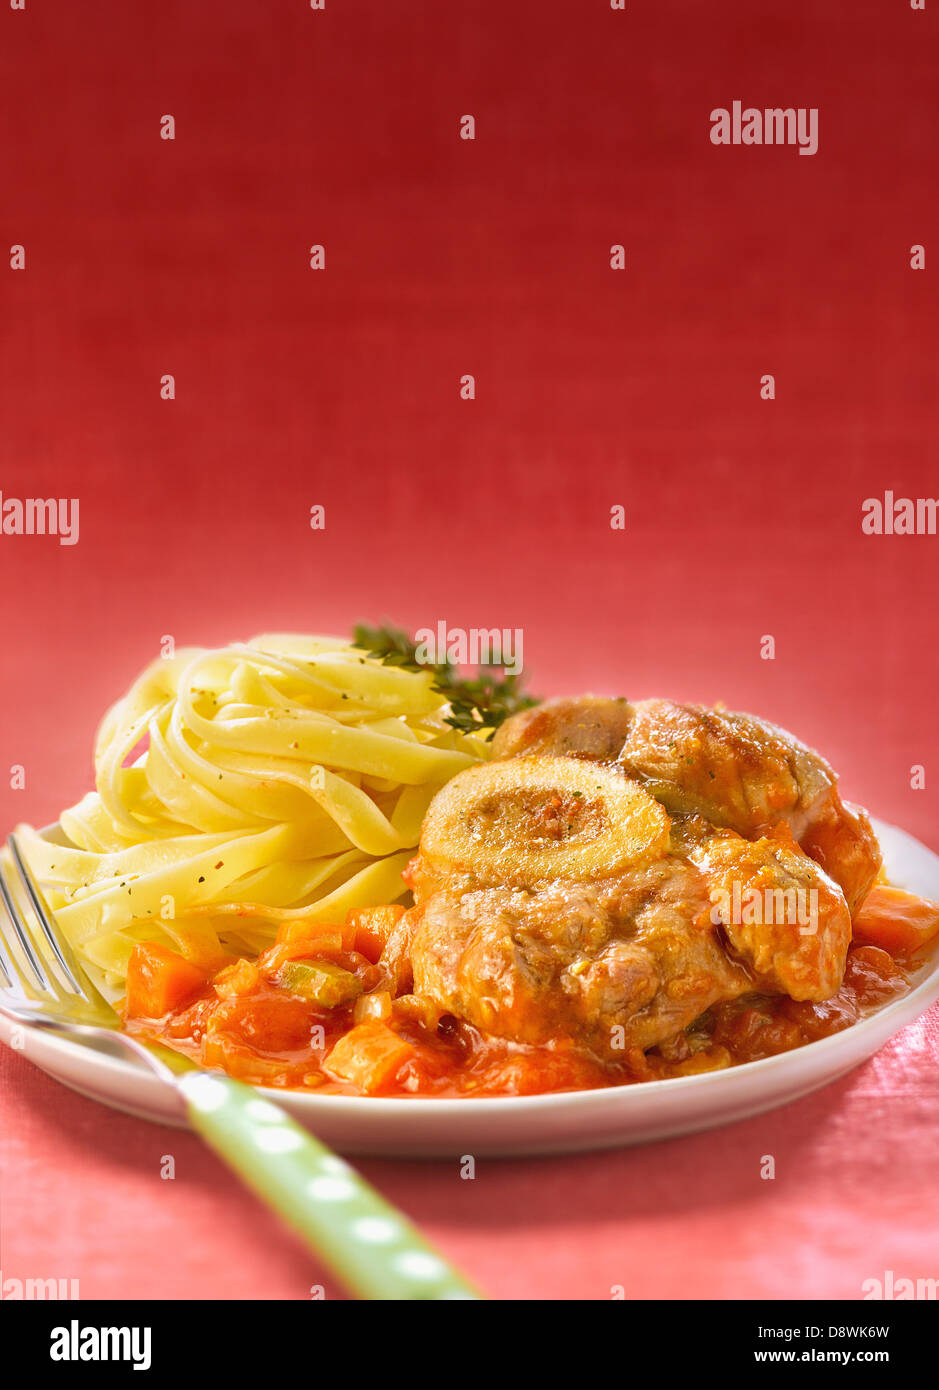 Veal Osso bucco Stock Photo